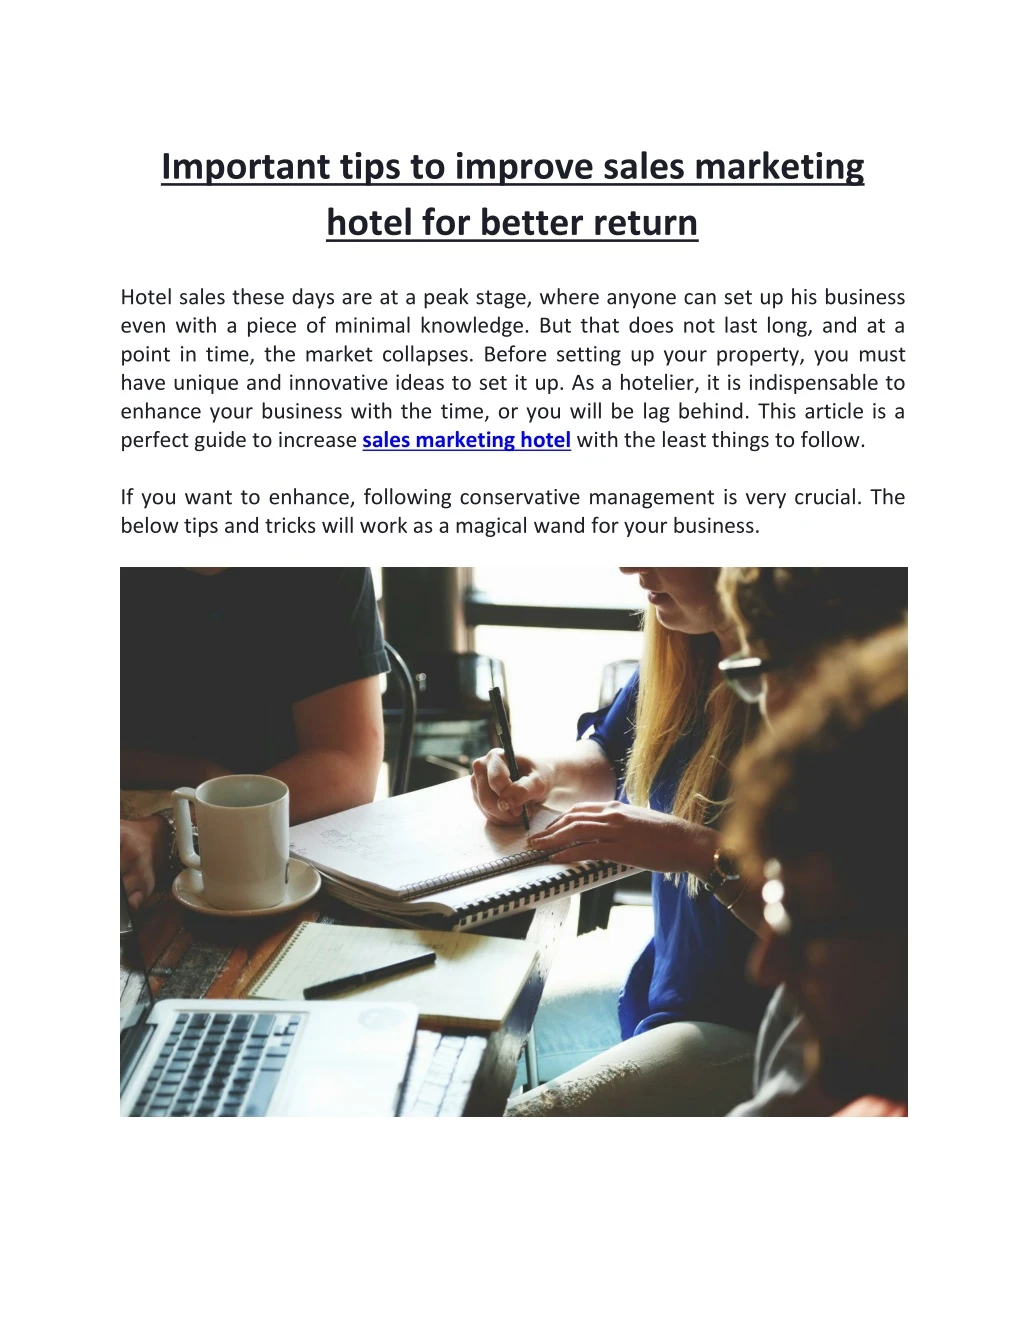 important tips to improve sales marketing hotel